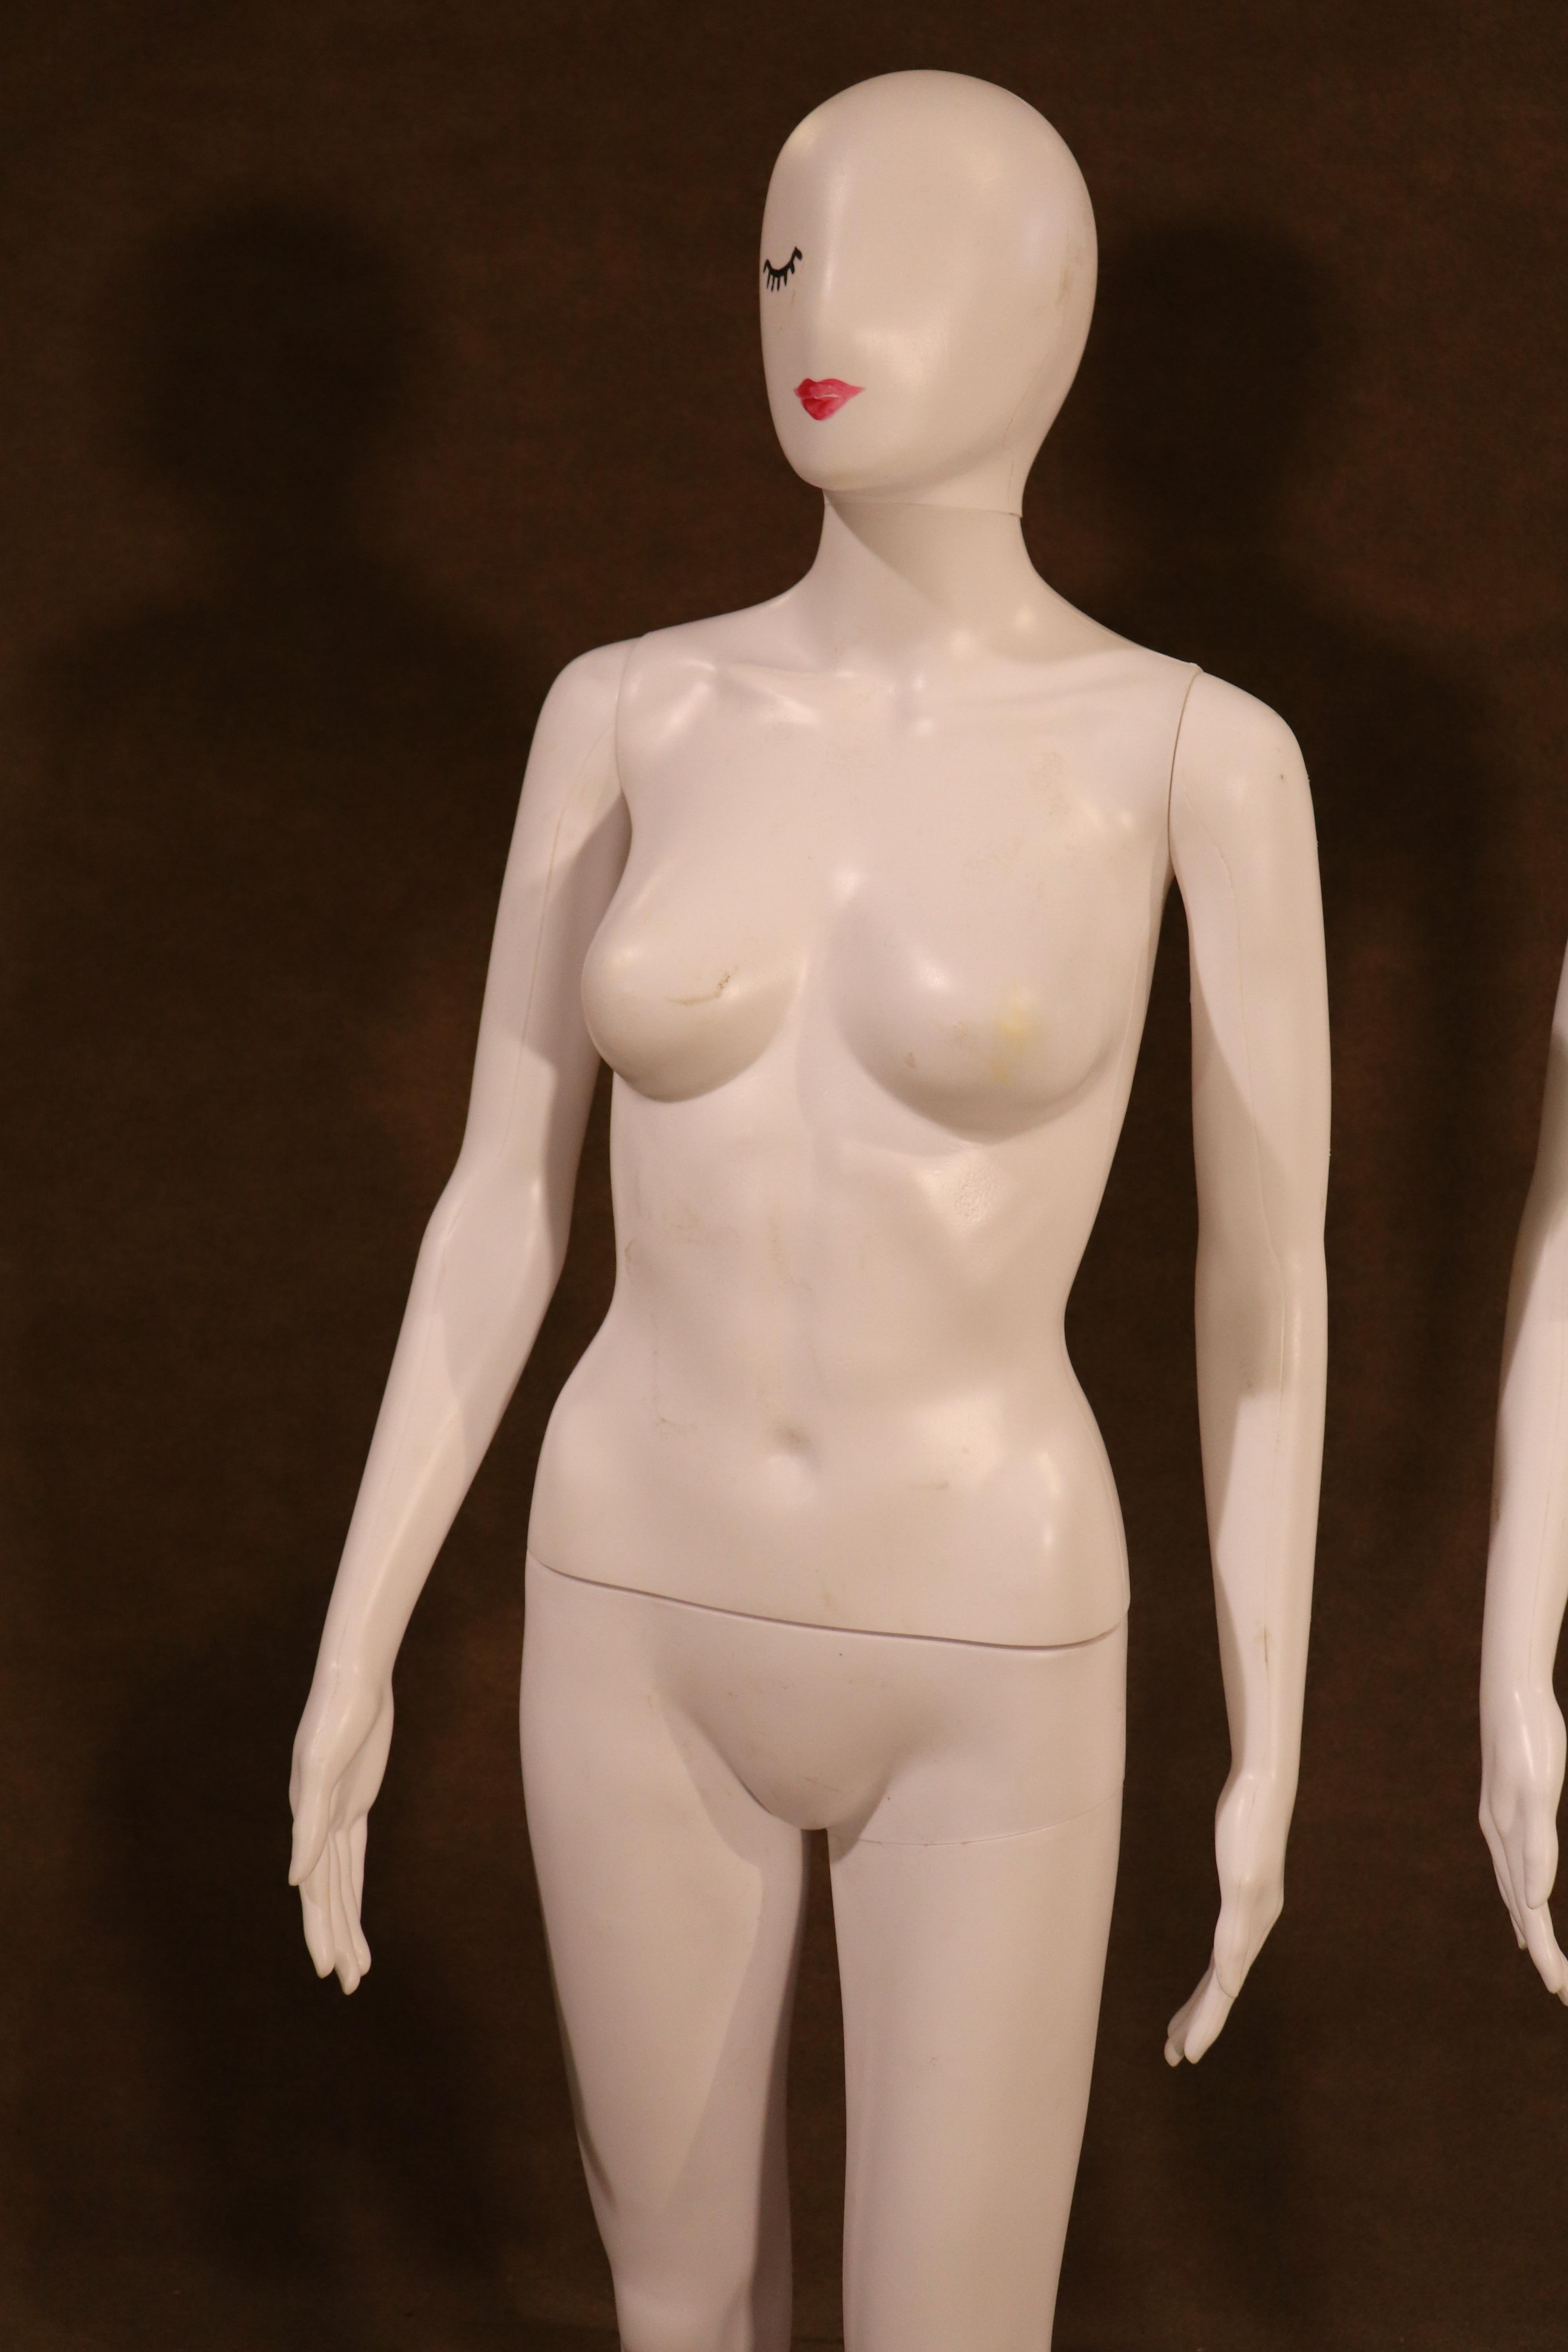 Listing is for a single standing mannequin with adjustable arms and torso. 2 available.
Please confirm location NY or NJ